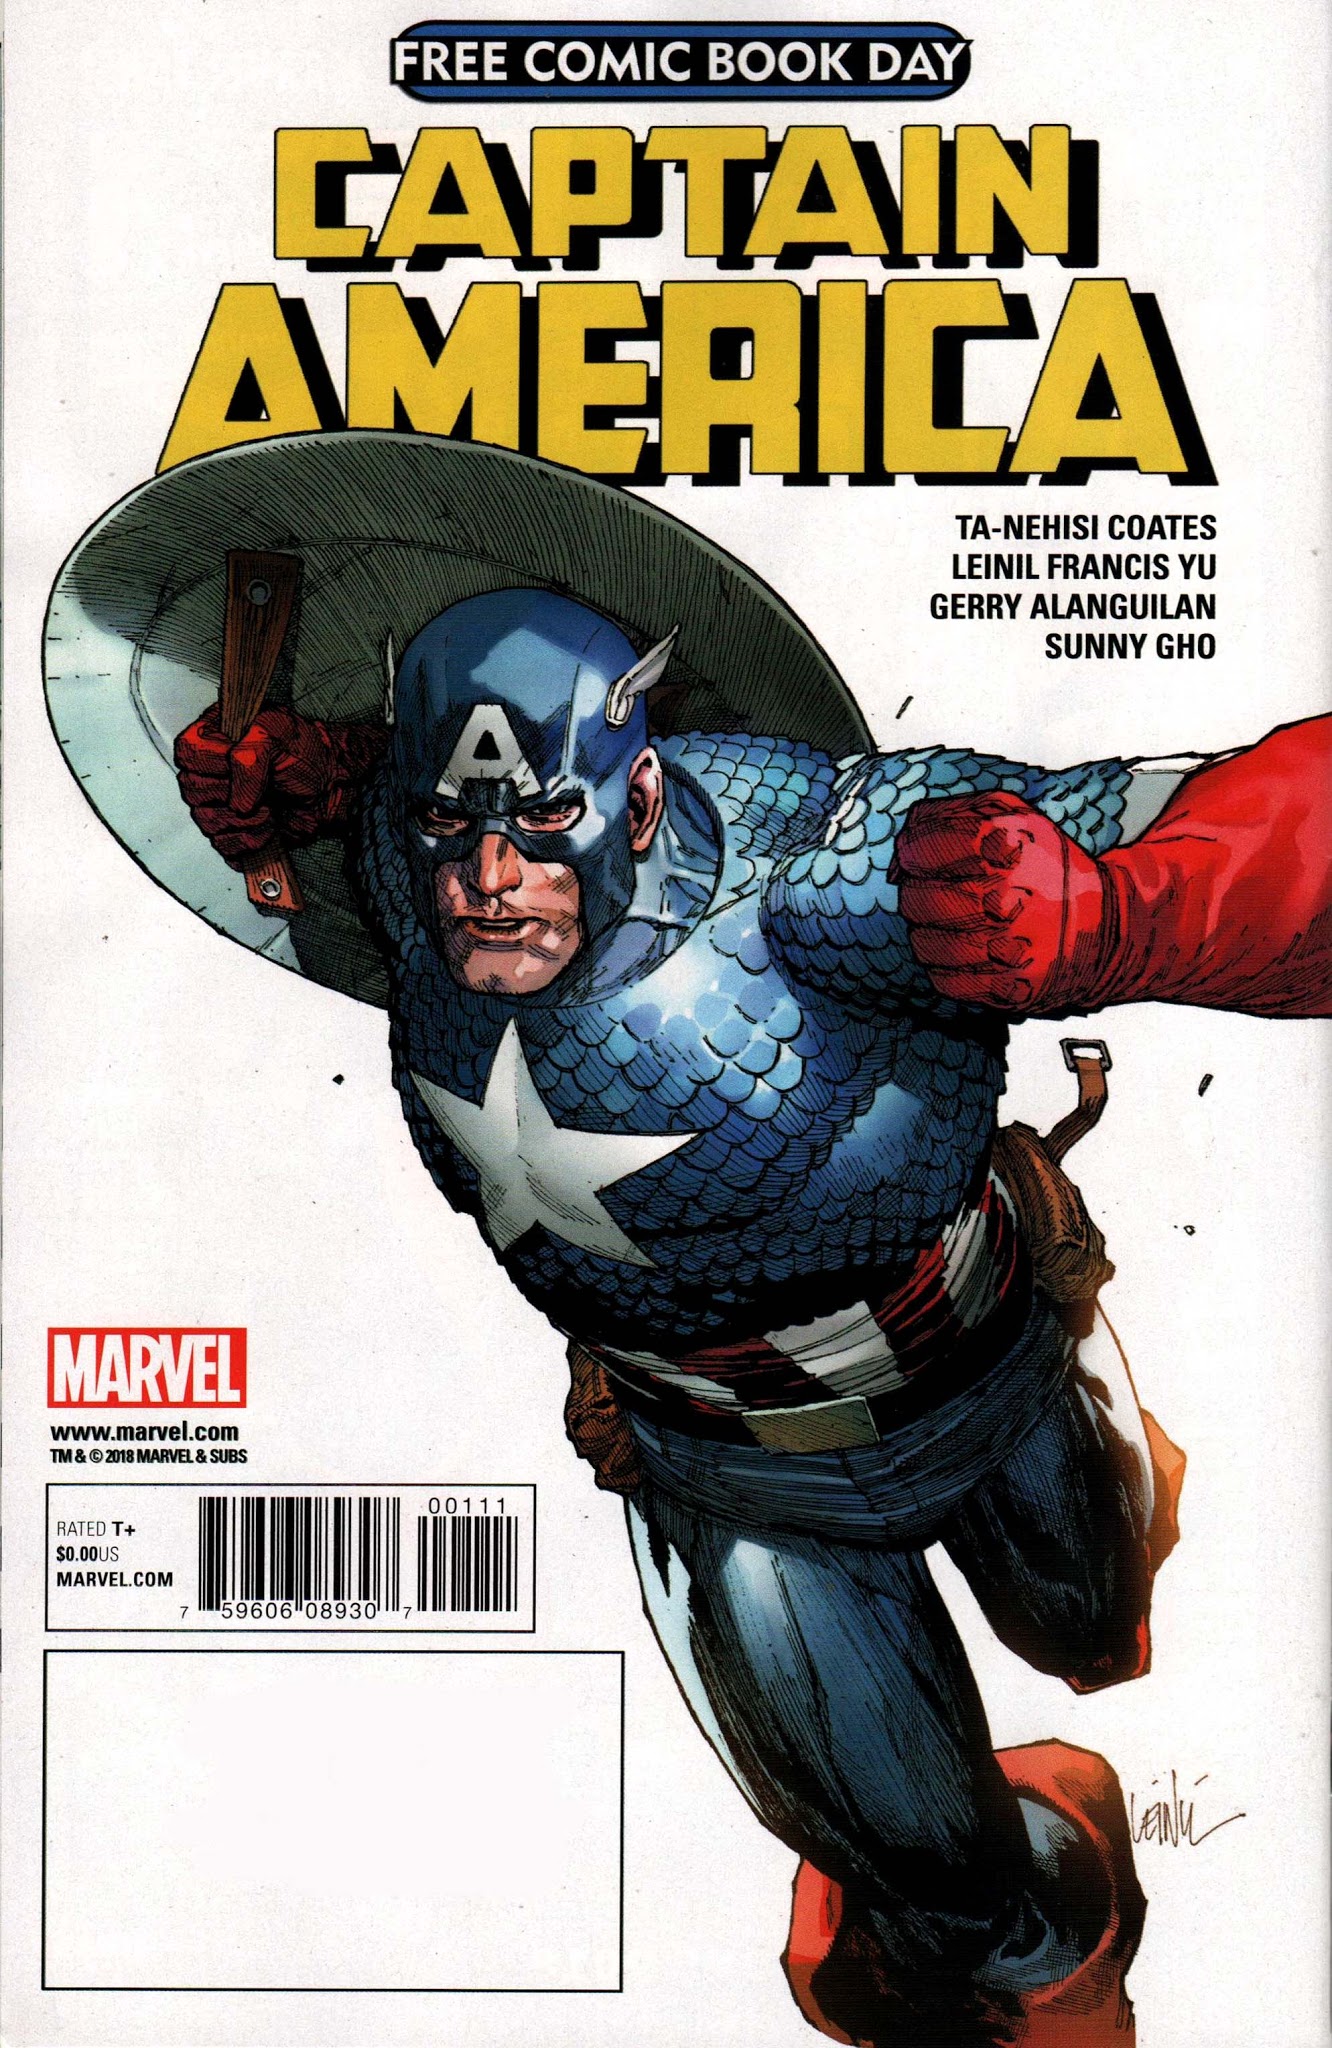 Read online Free Comic Book Day 2018 comic -  Issue # Avengers - Captain America - 17